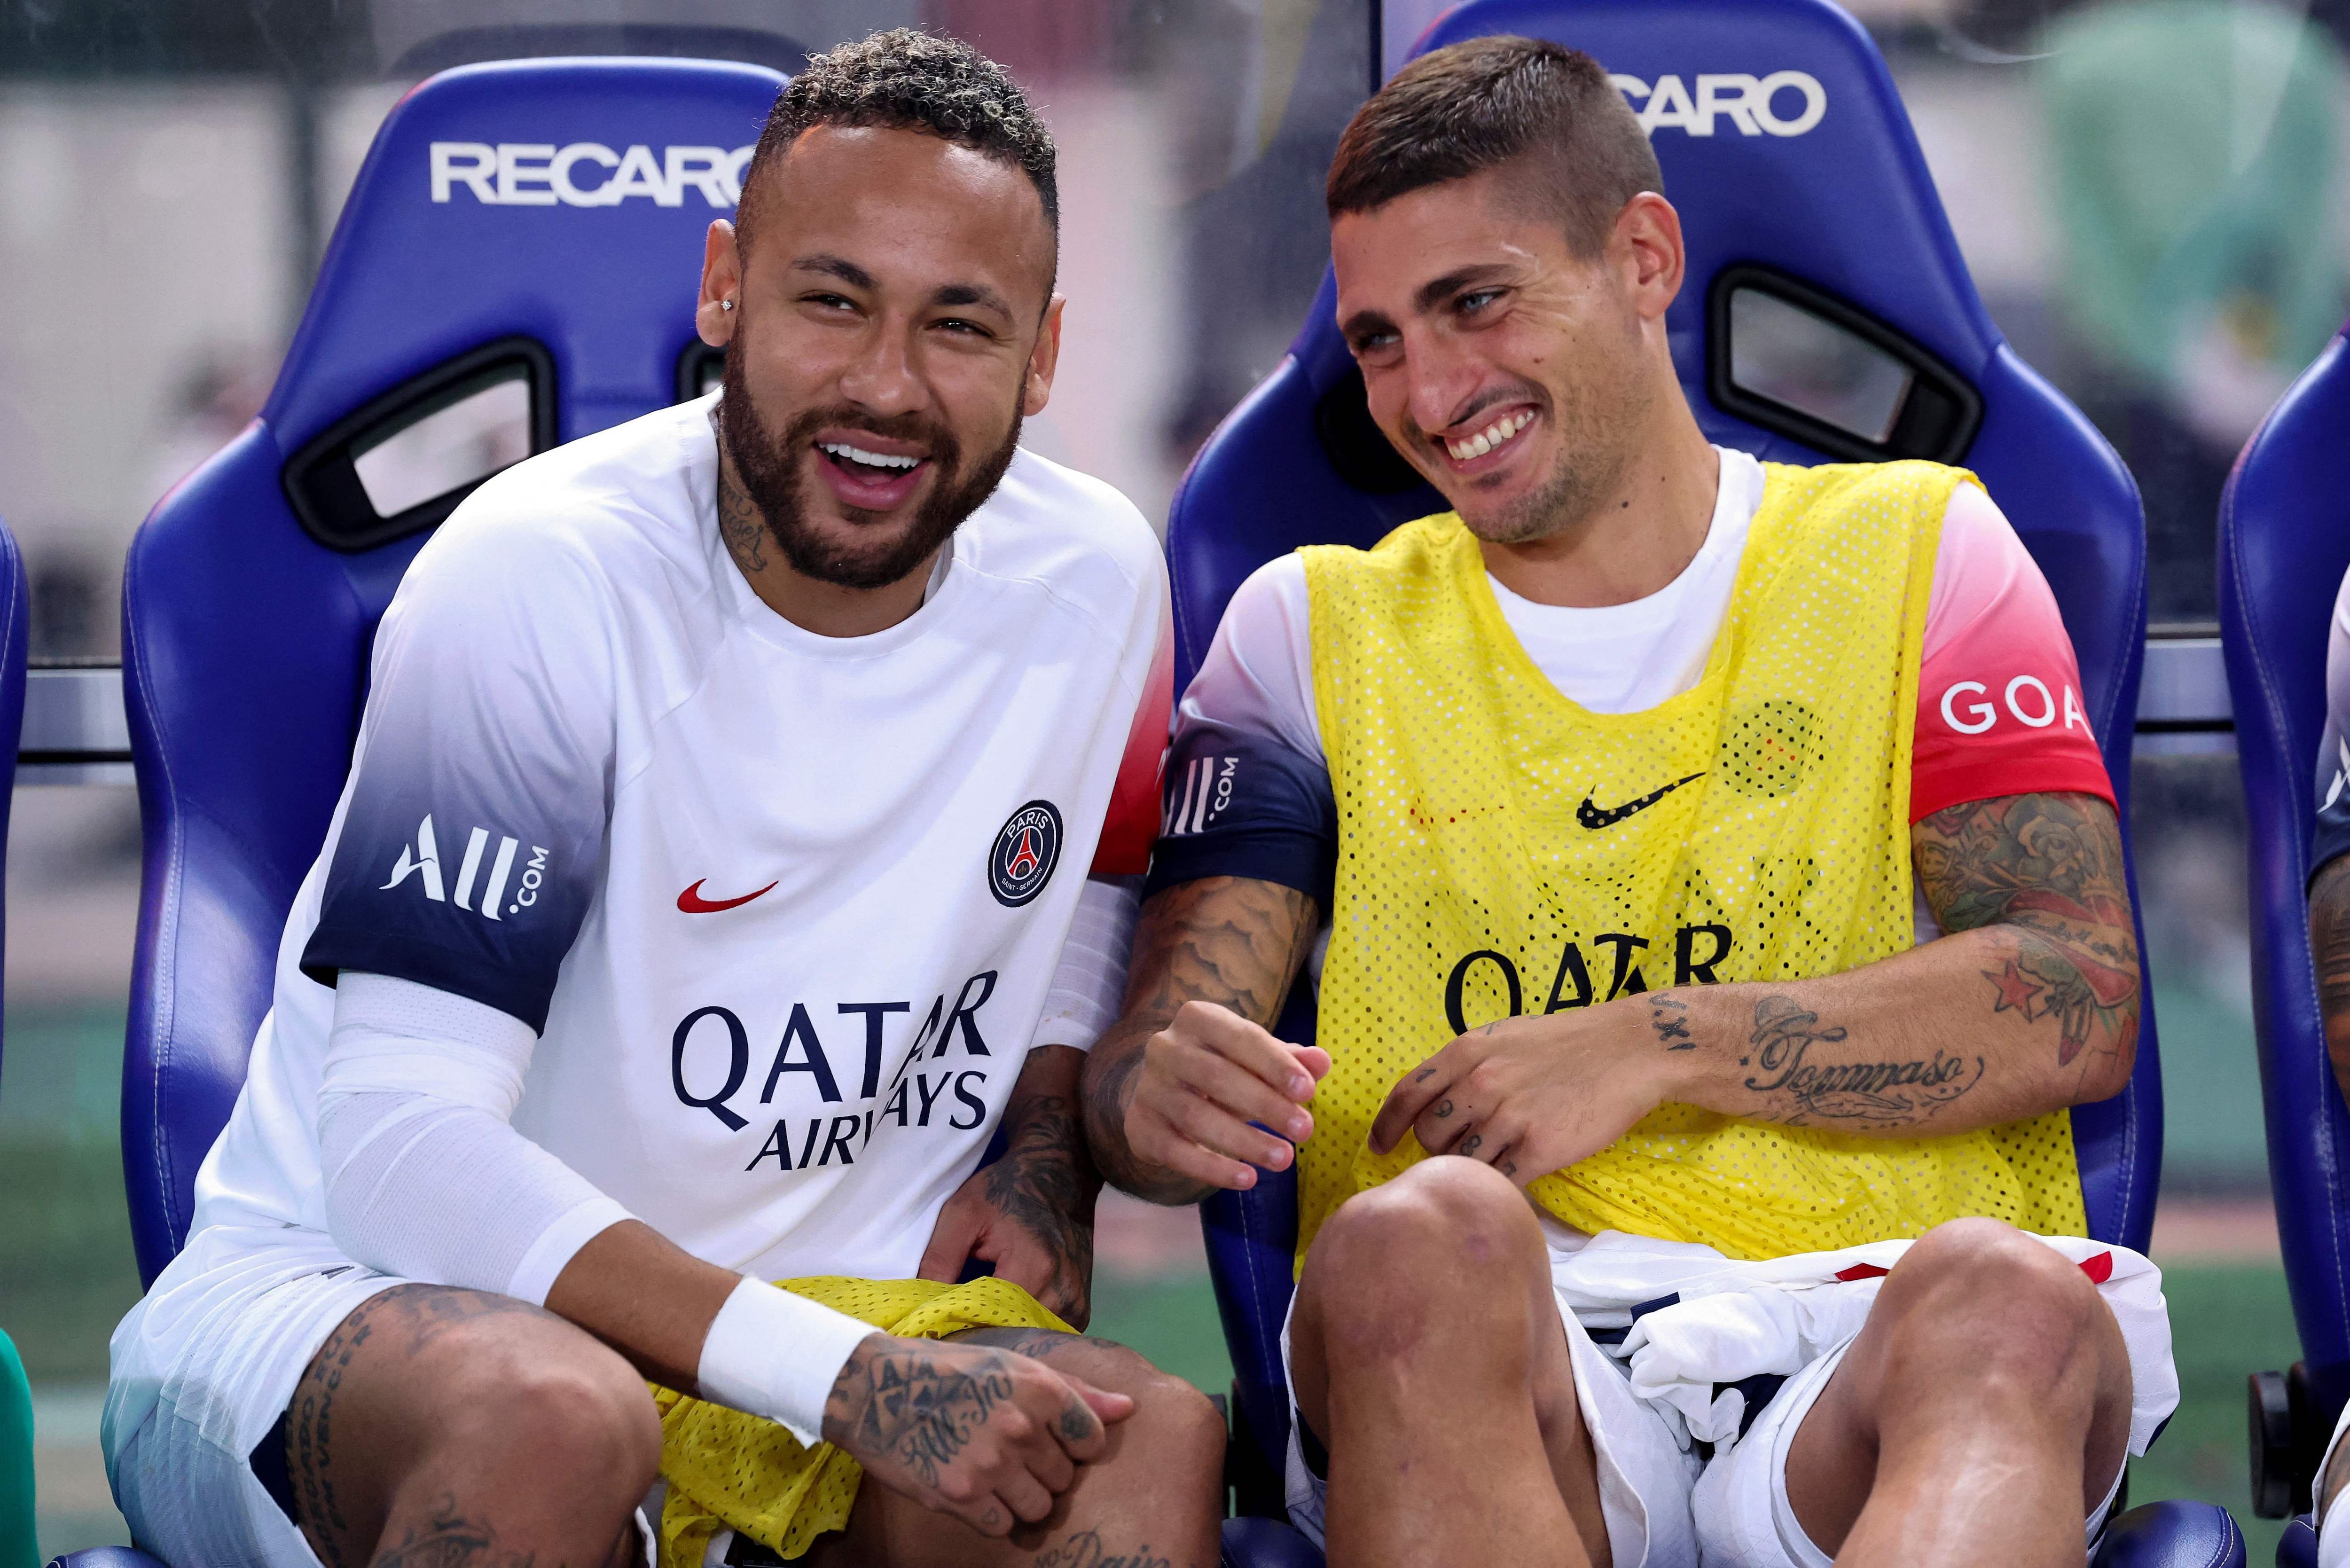 Paris Saint-Germain's Neymar Jr (L) and Marco Verratti look on from the bench before the friendly football match between France's Paris Saint-Germain and Japan's Cerezo Osaka at Nagai Stadium in Osaka on July 28, 2023. (Photo by PAUL MILLER / AFP)